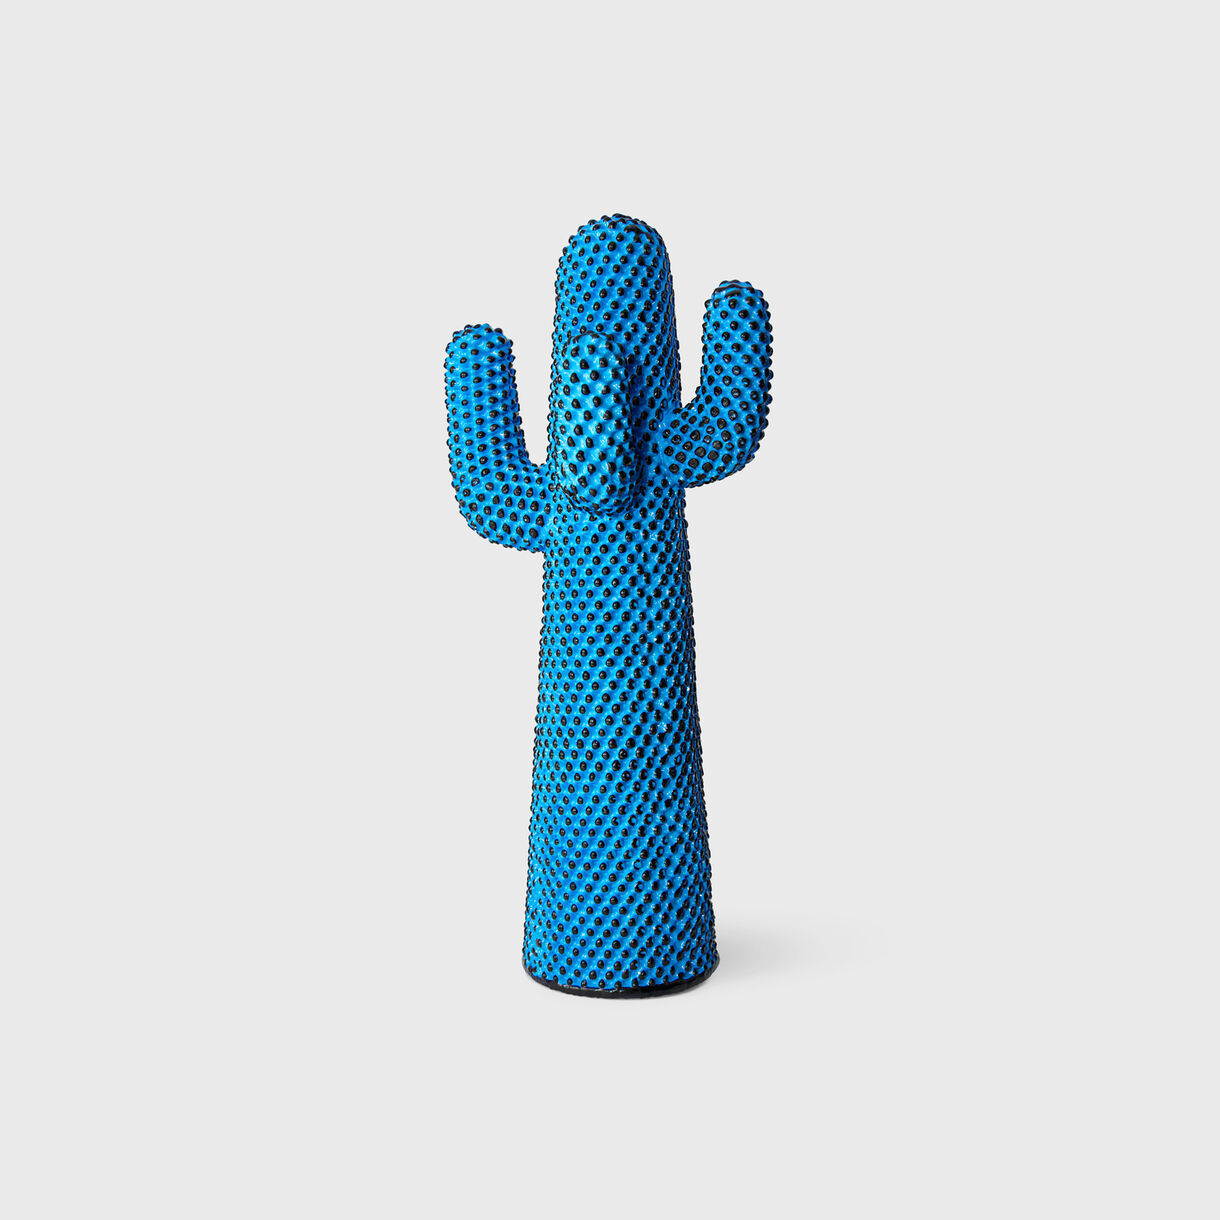 Andy's Cactus, Blue